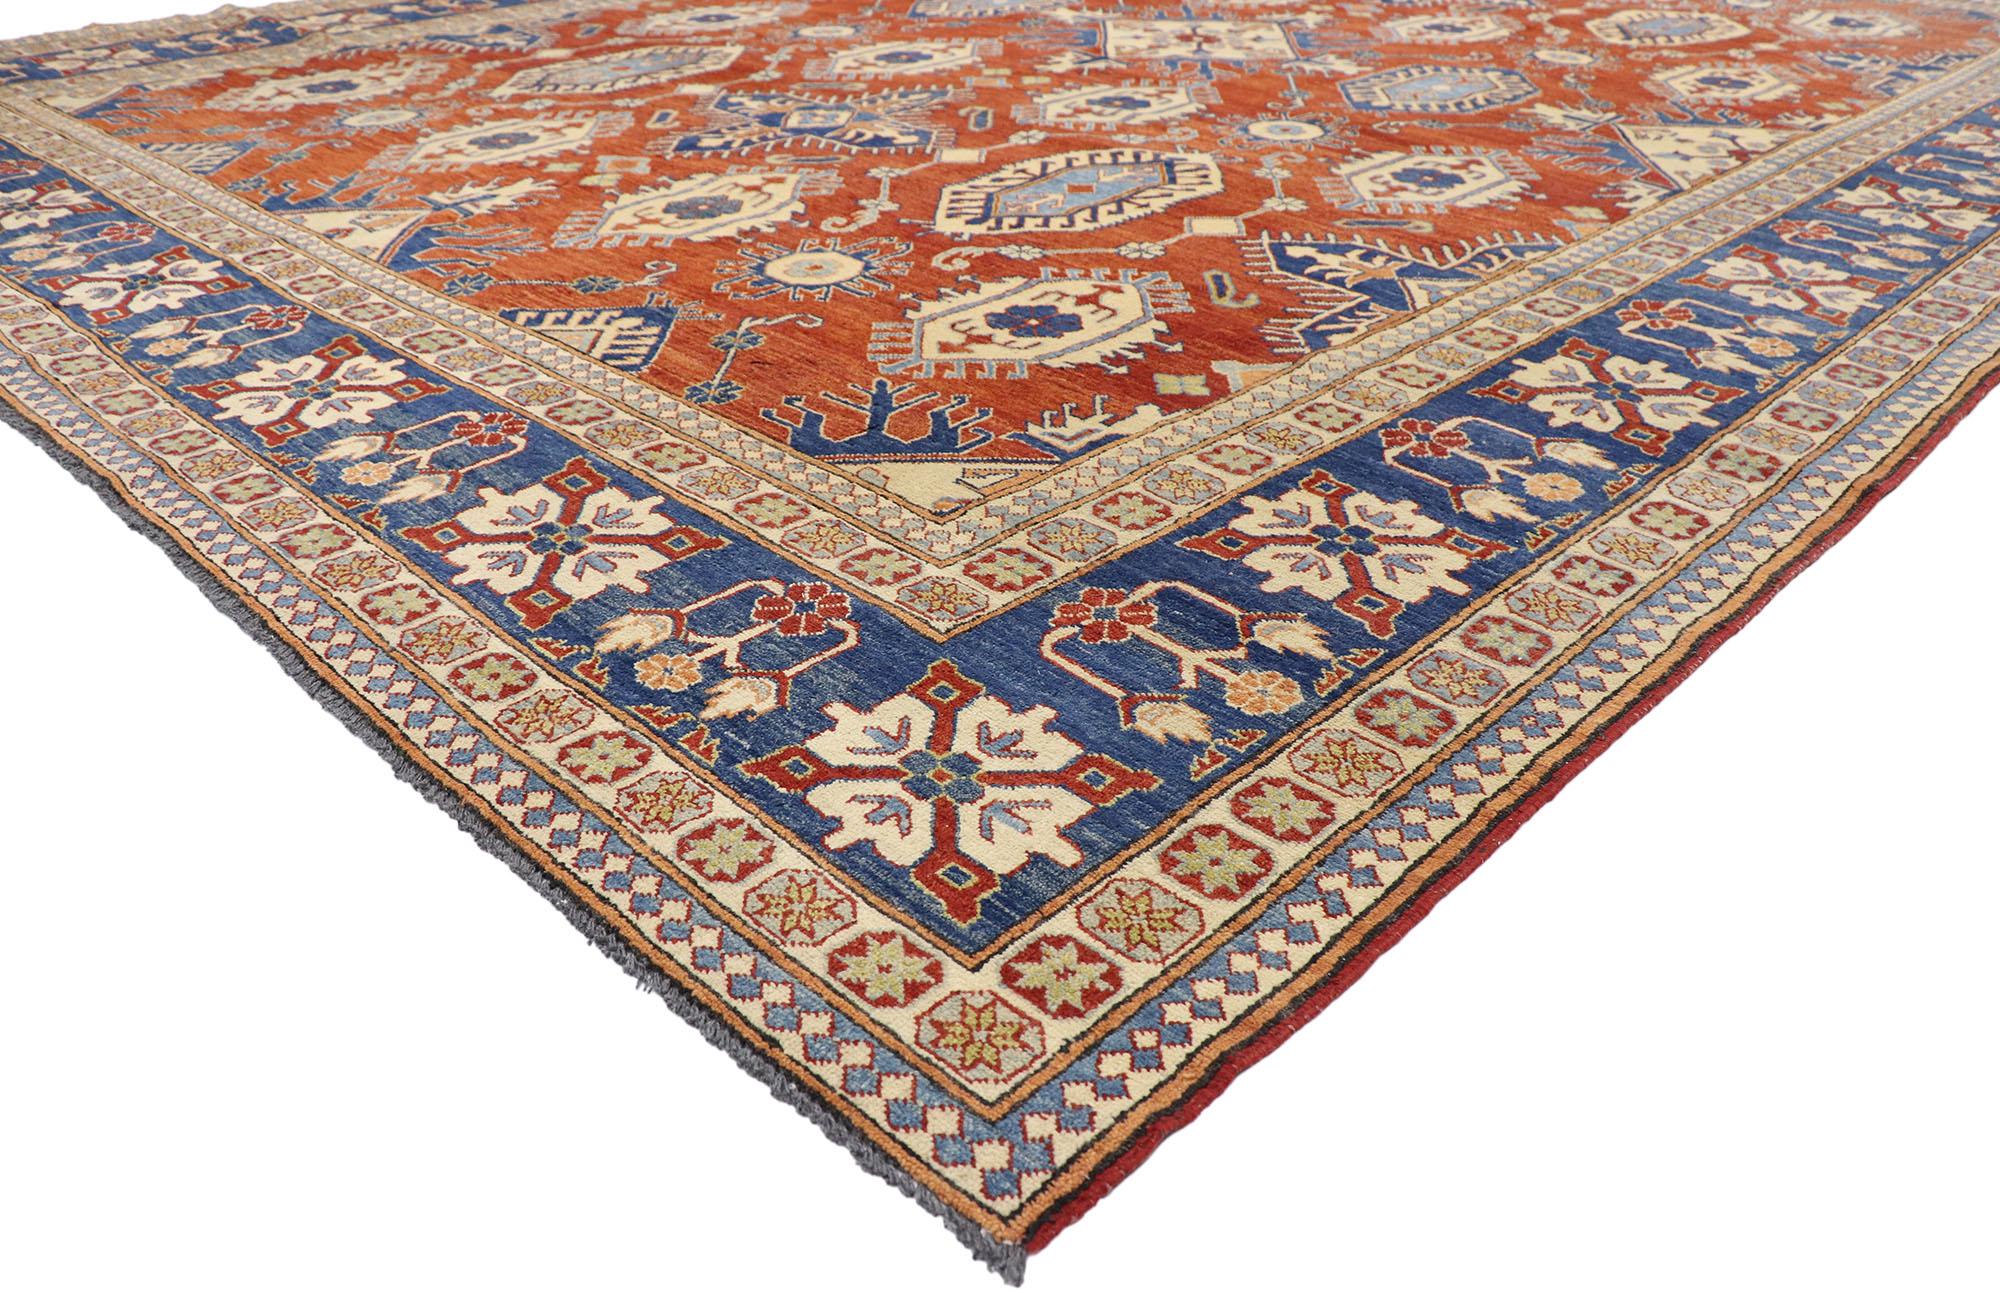 76878, vintage Persian Shiraz Afghani rug with modern colonial and federal style 11'09 x 16'03. Traditional and regal with brilliant color, this hand-knotted wool vintage Persian design area rug with modern Colonial and Federal style can beautifully